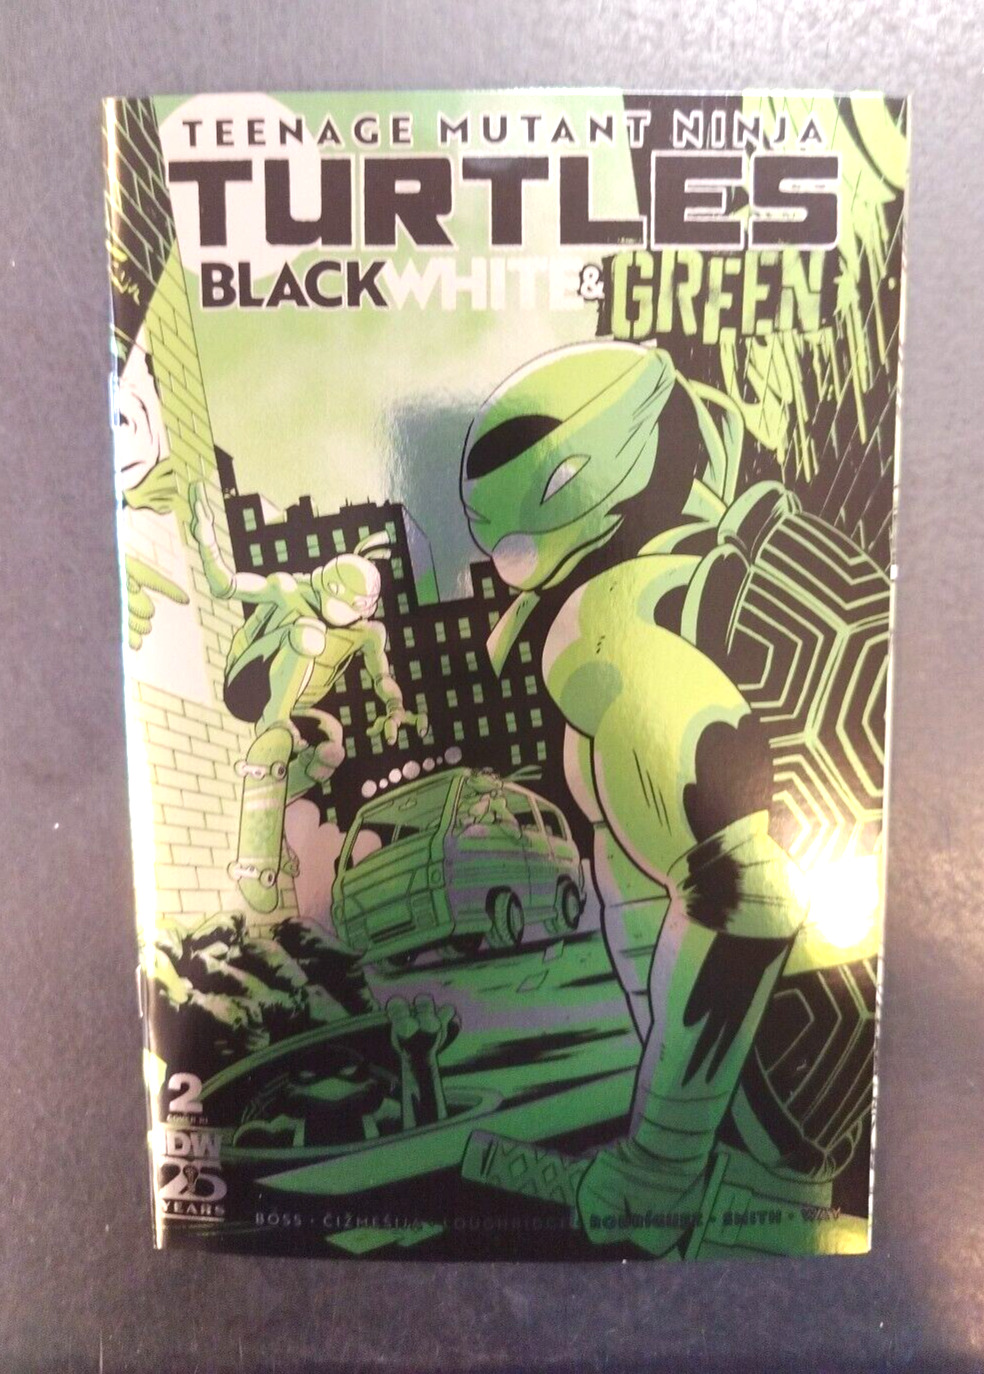 TMNT: Black, White, and Green #2 Foil 1:10 Ratio